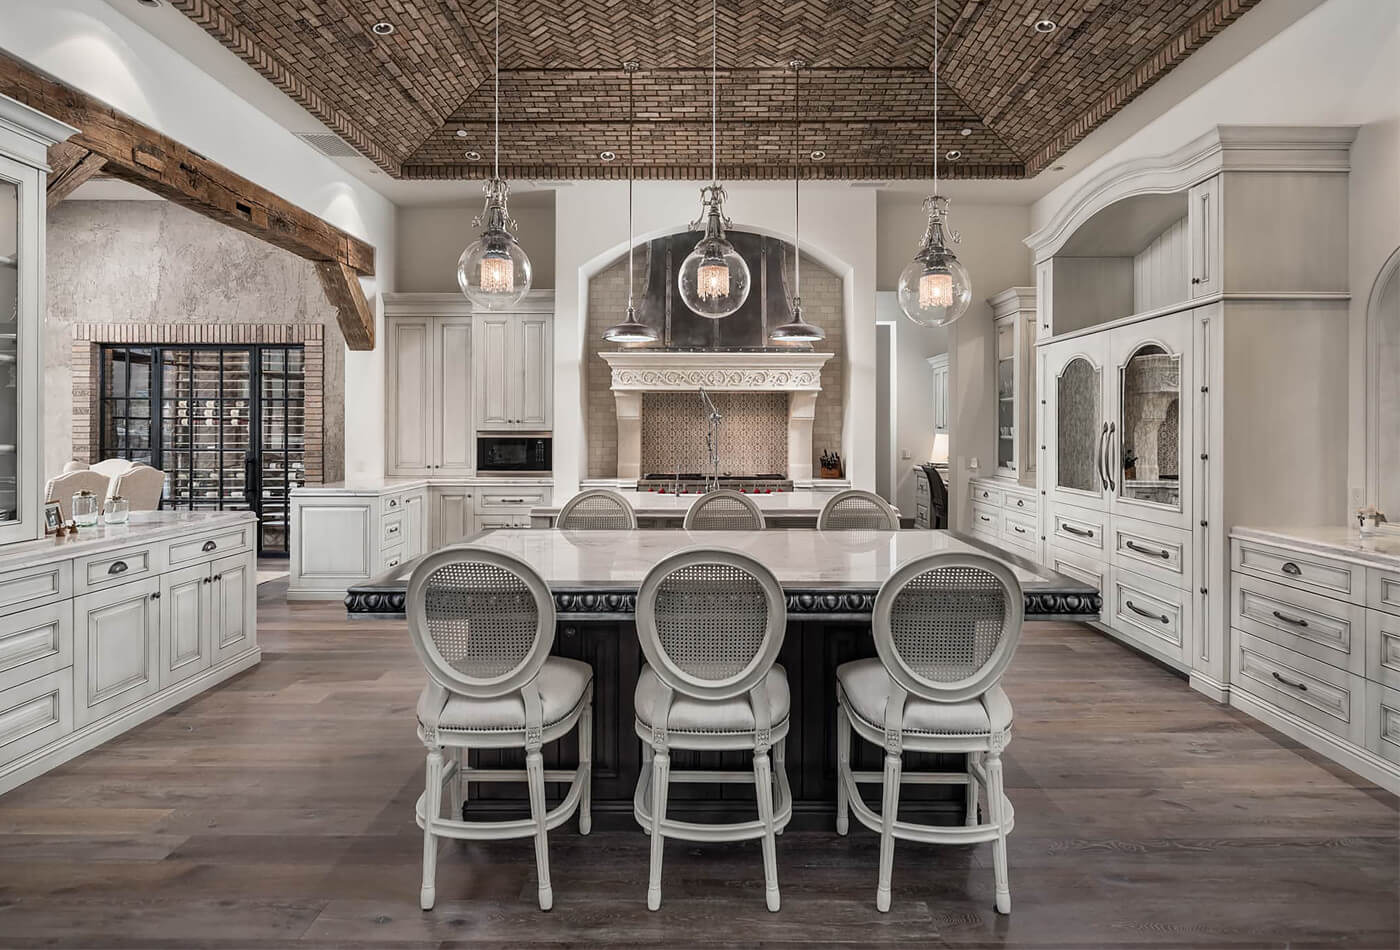 What Makes Your Dream Kitchen The Best?